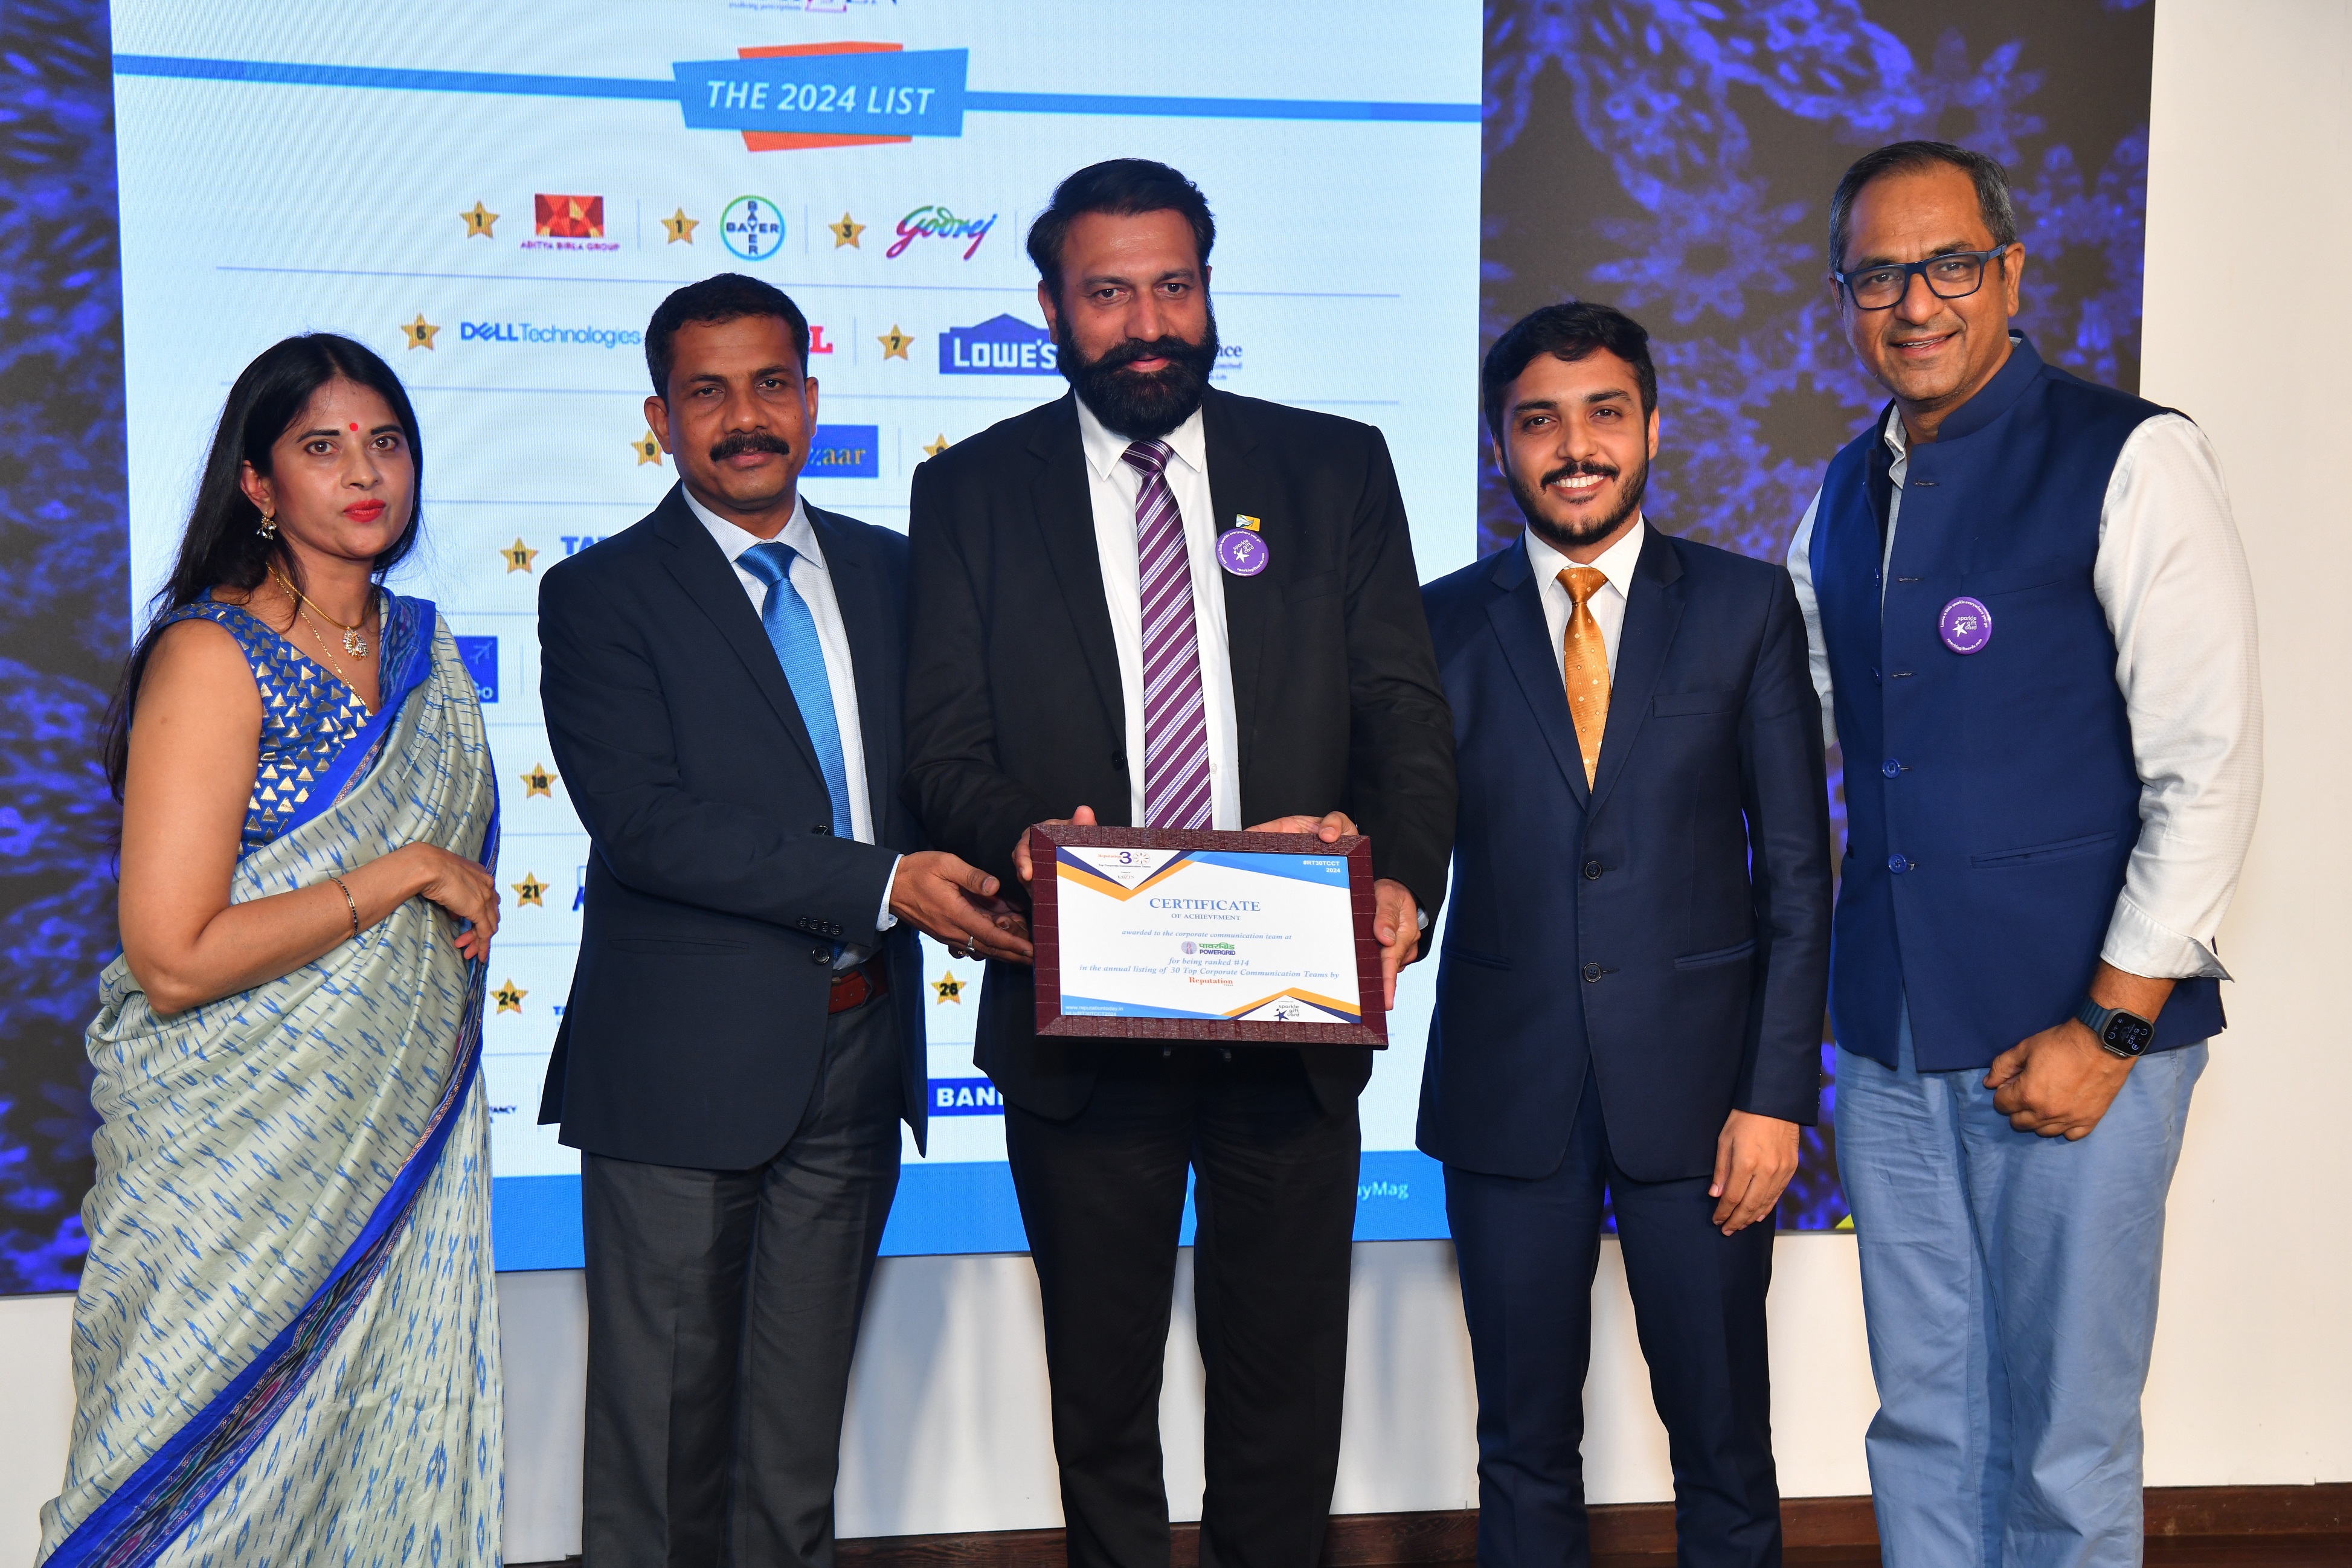 POWERGRID has been conferred the Best CSR Practices Award by the World CSR Congress